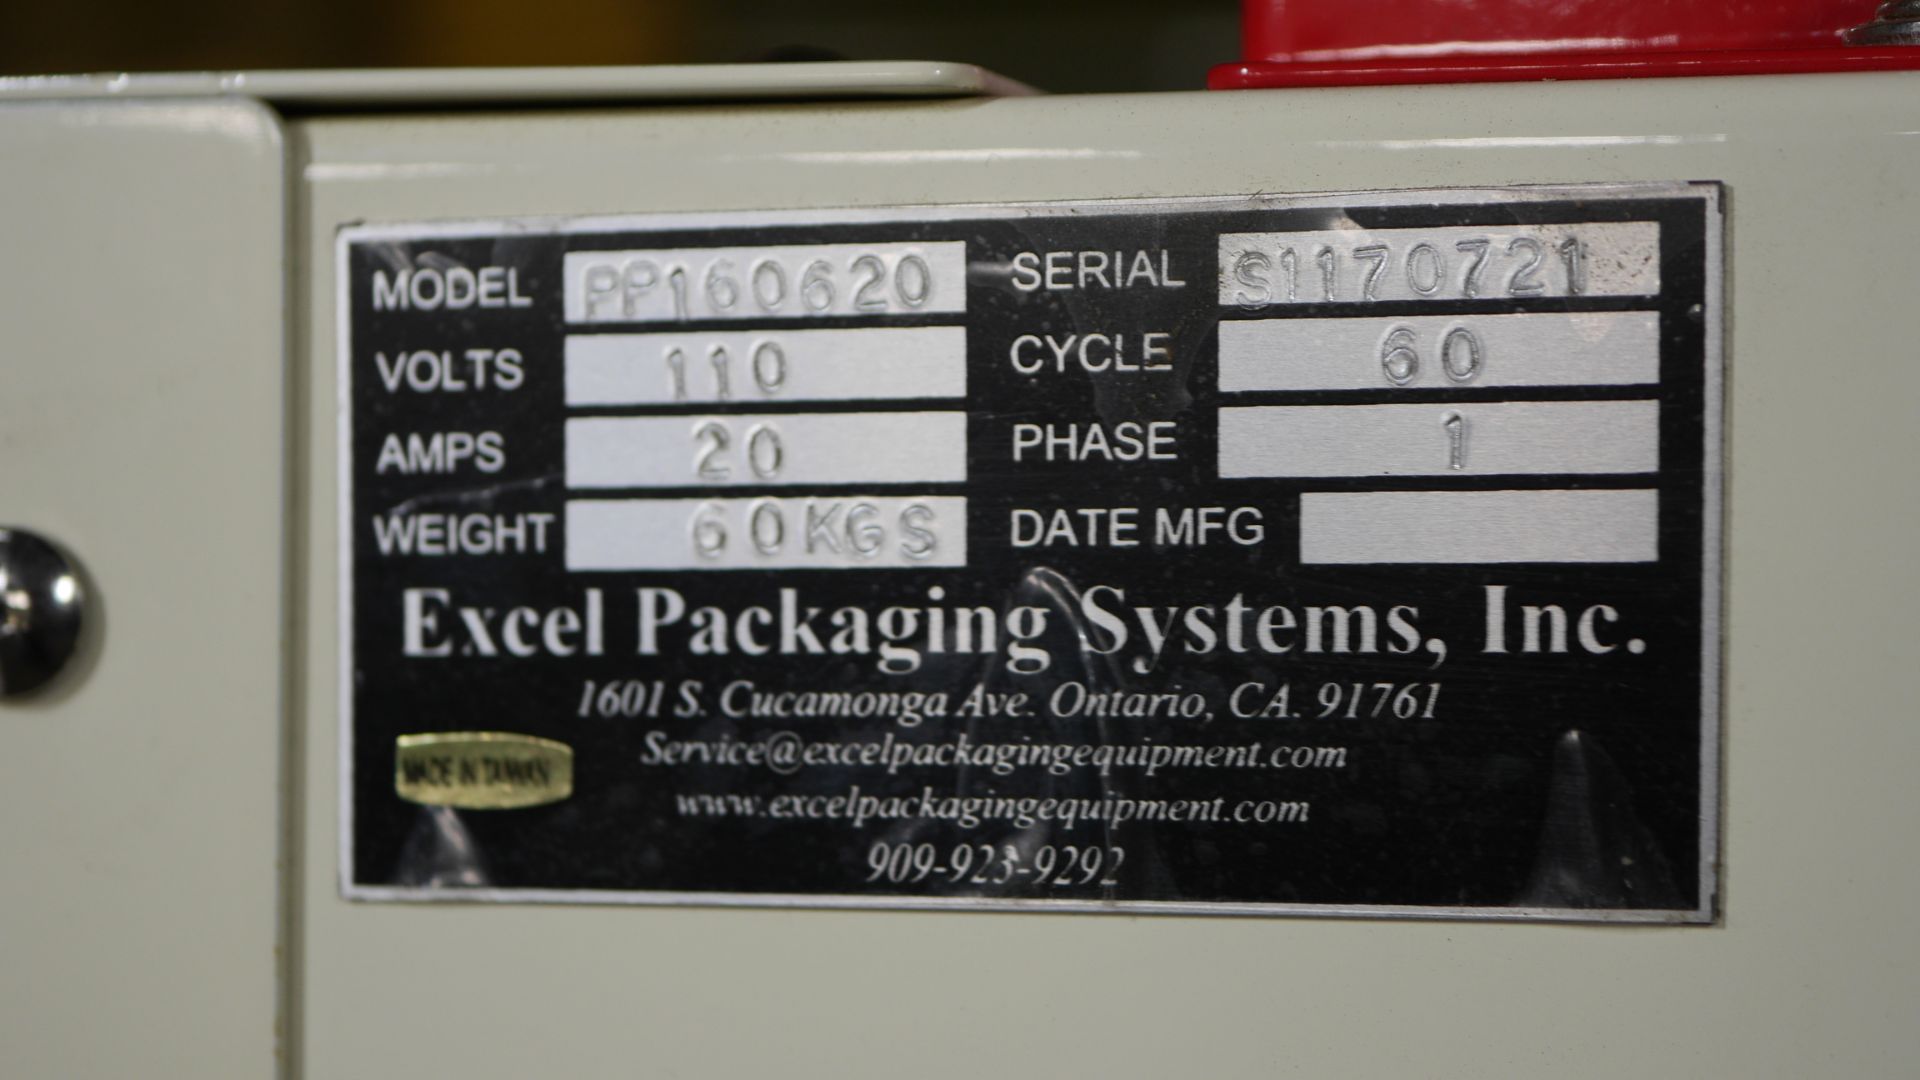 Used Excel Packaging Systems. Model PP160620. - Image 6 of 10